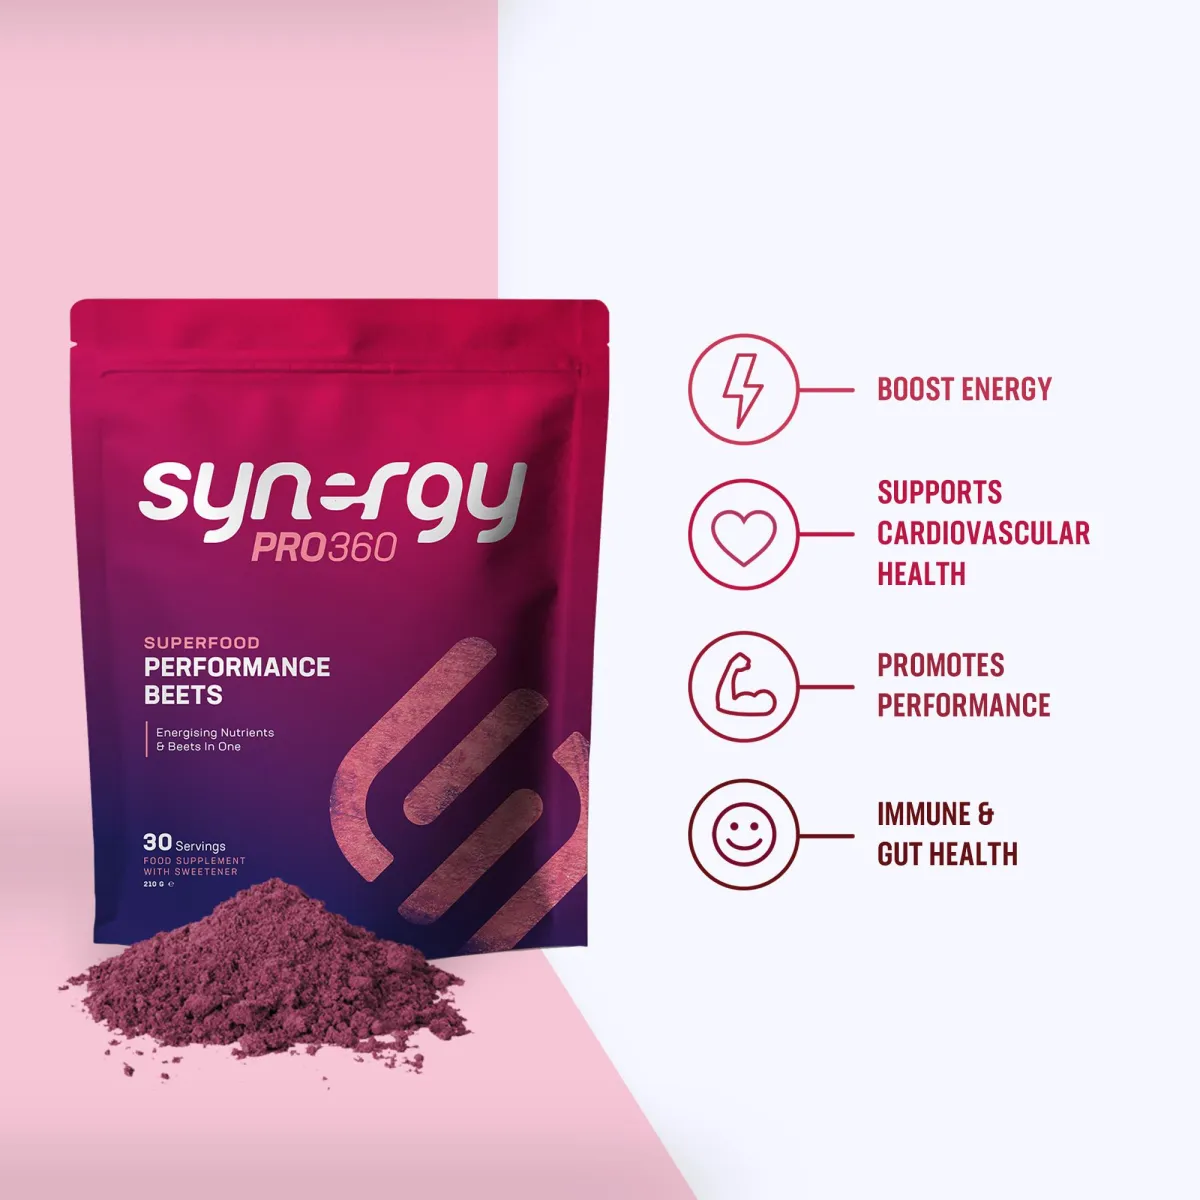 Synergy Pro30 Superfood Performance Beets - Main Benefits